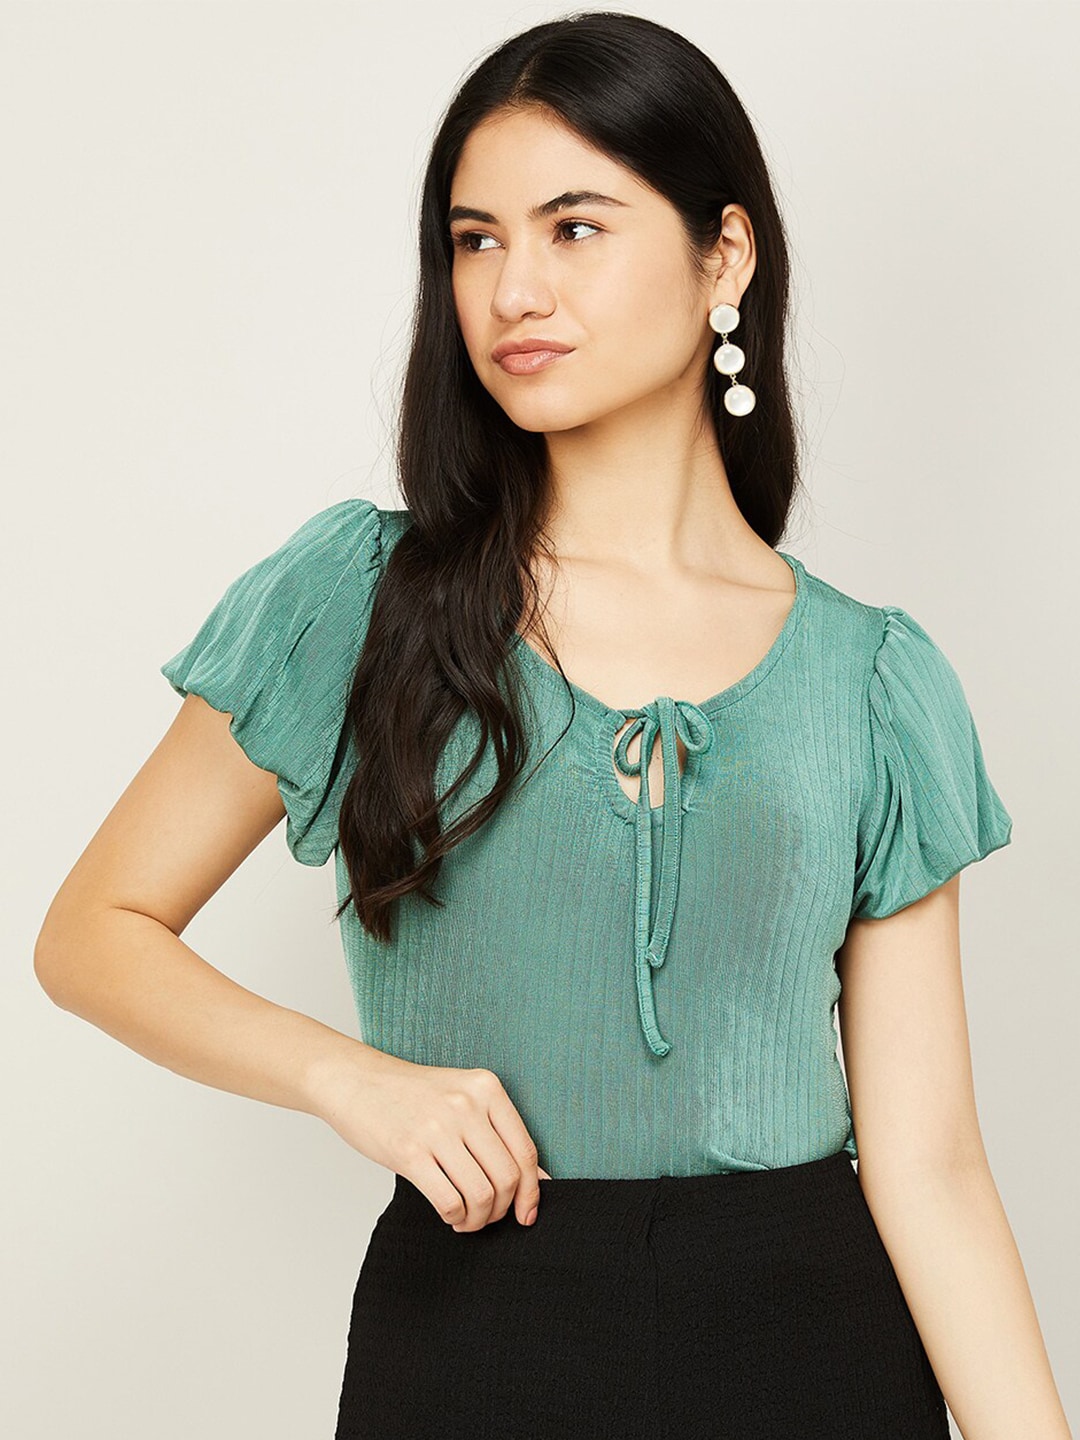 CODE by Lifestyle Green Tie-Up Neck Cotton Top Price in India